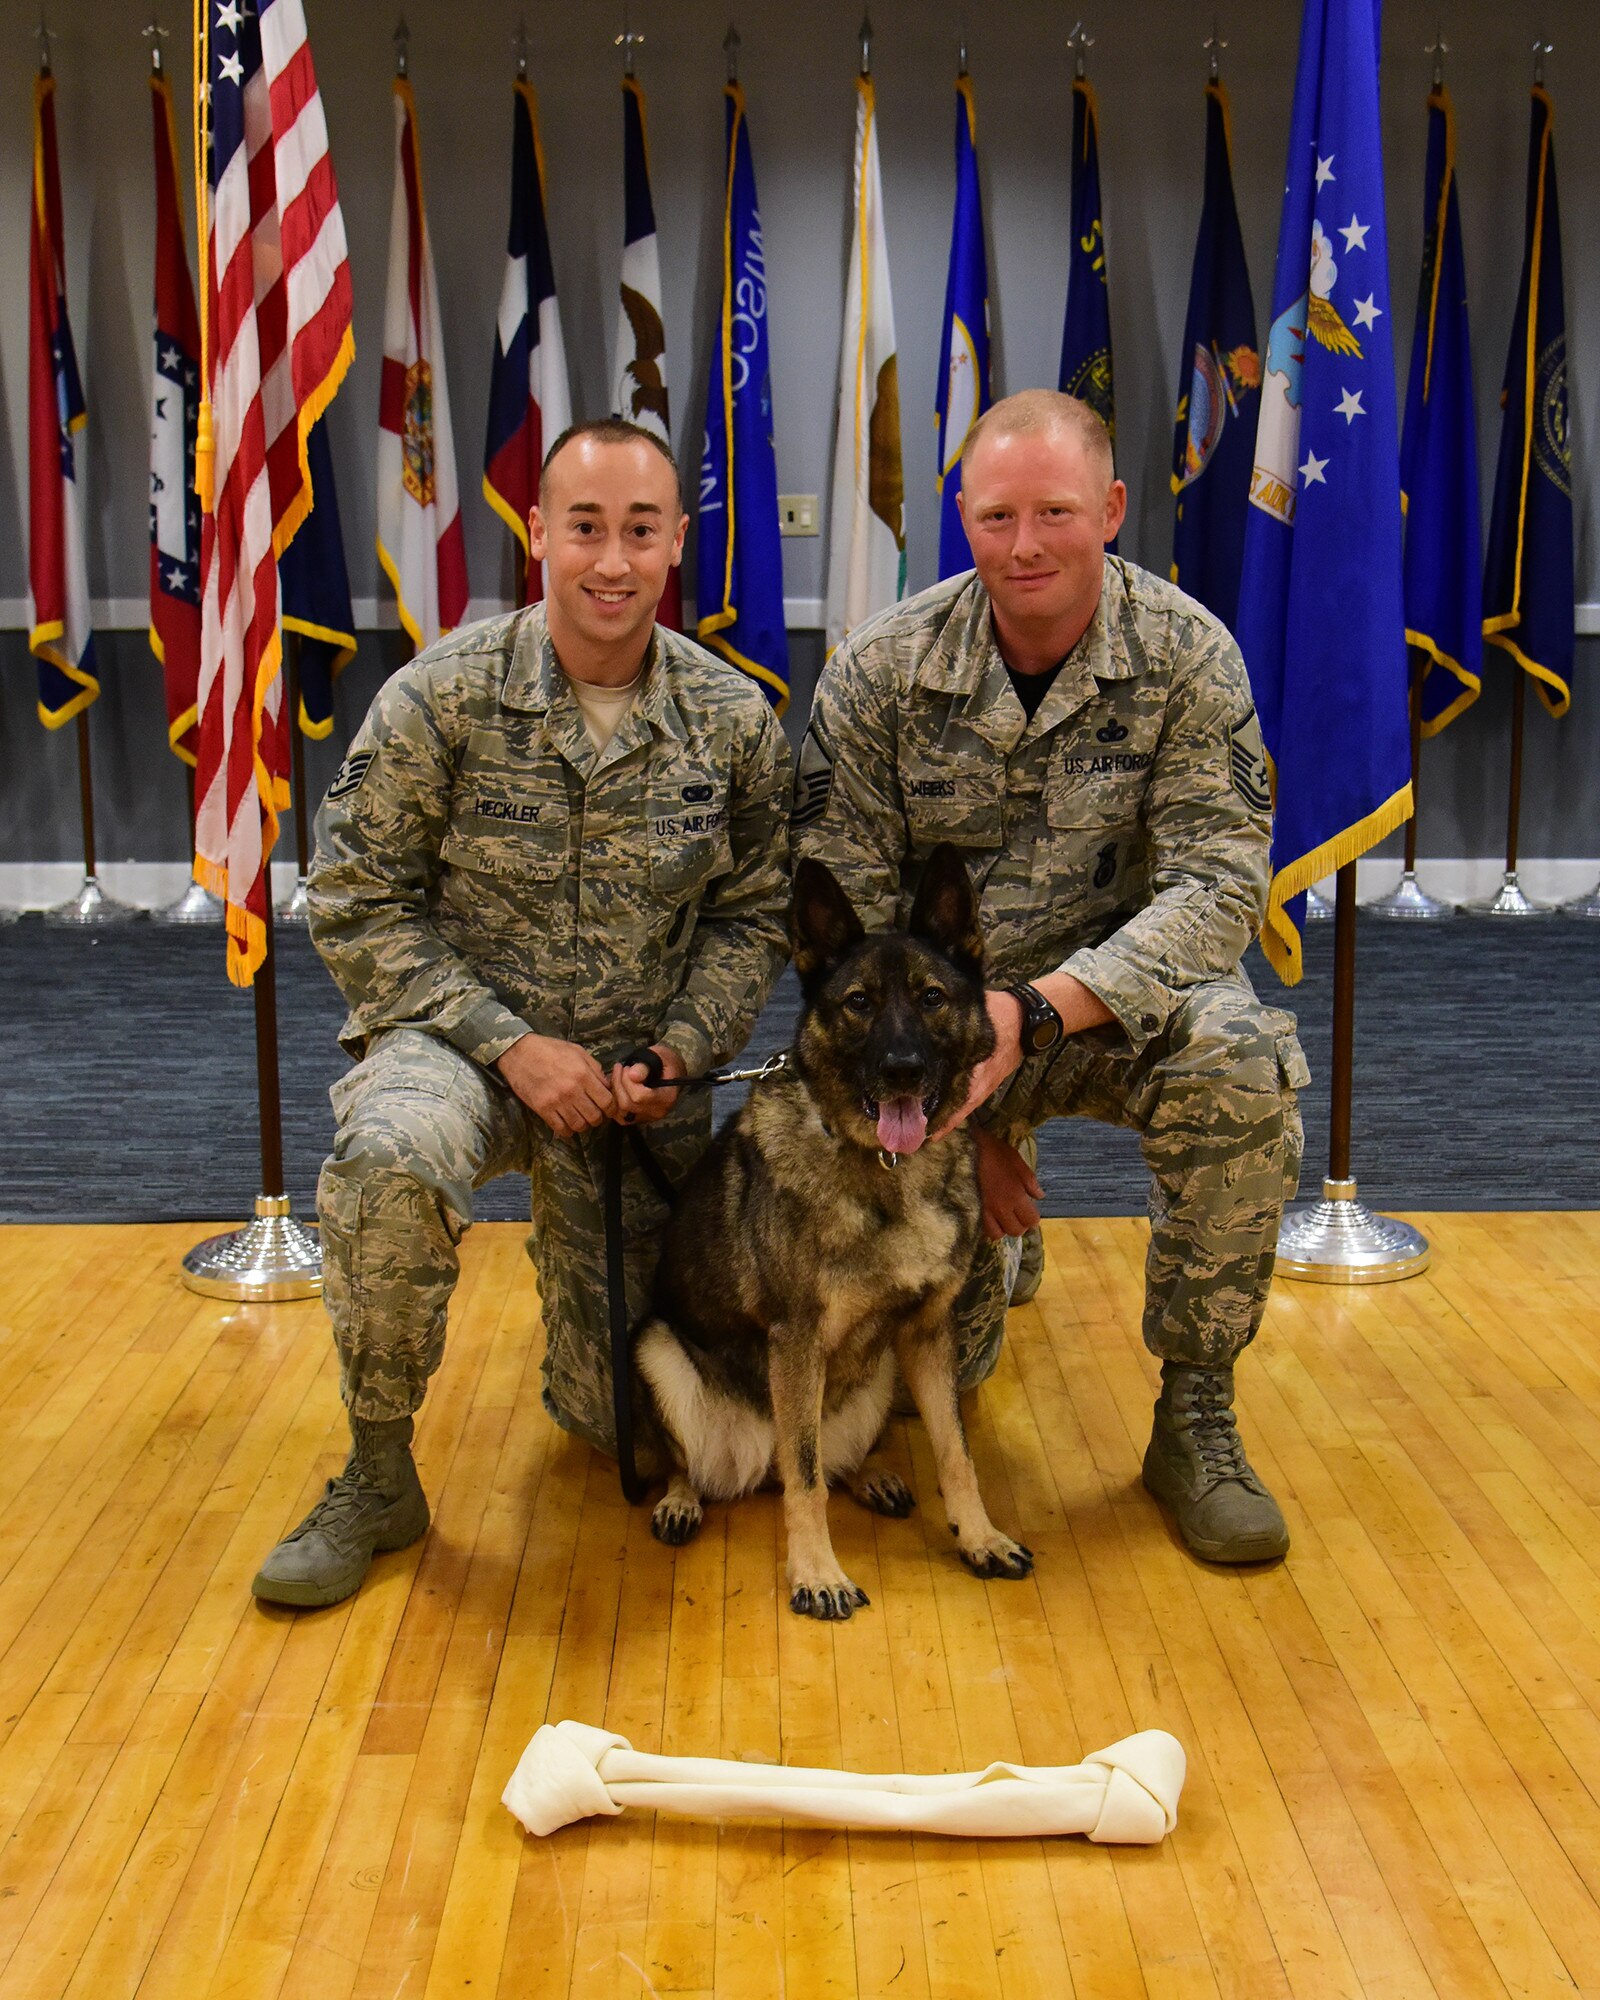 Staff Sgt. Nicholas Heckler, former 14th Security Forces Squadron military working dog handler, and Master Sgt. Dustin Weeks, 14th Security Forces Squadron acting first sergeant, kneel beside newly retired MWD Cherry, during Cherry’s retirement ceremony Aug. 24, 2018, on Columbus Air Force Base, Mississippi. Cherry retired after serving the Air Force for 10 years, and will go on to live with Heckler. (U.S. Air Force photo by Elizabeth Owens)